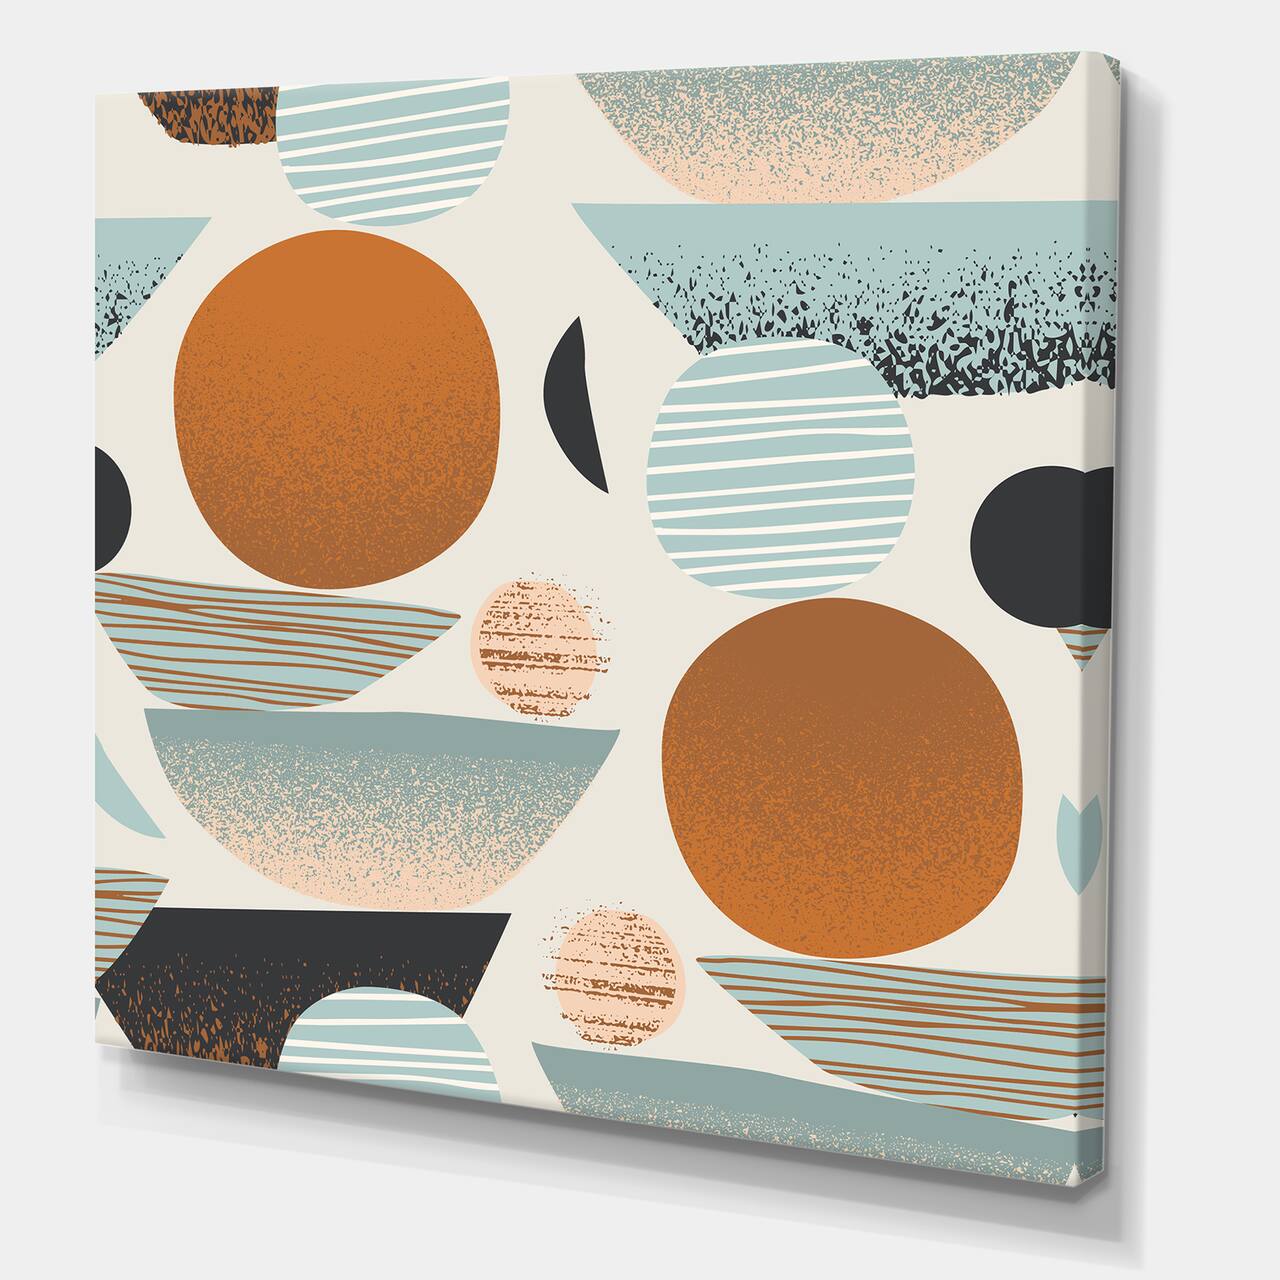 Designart - Retro Shapes With Abstract Suns and Moons I - Modern Canvas Wall Art Print